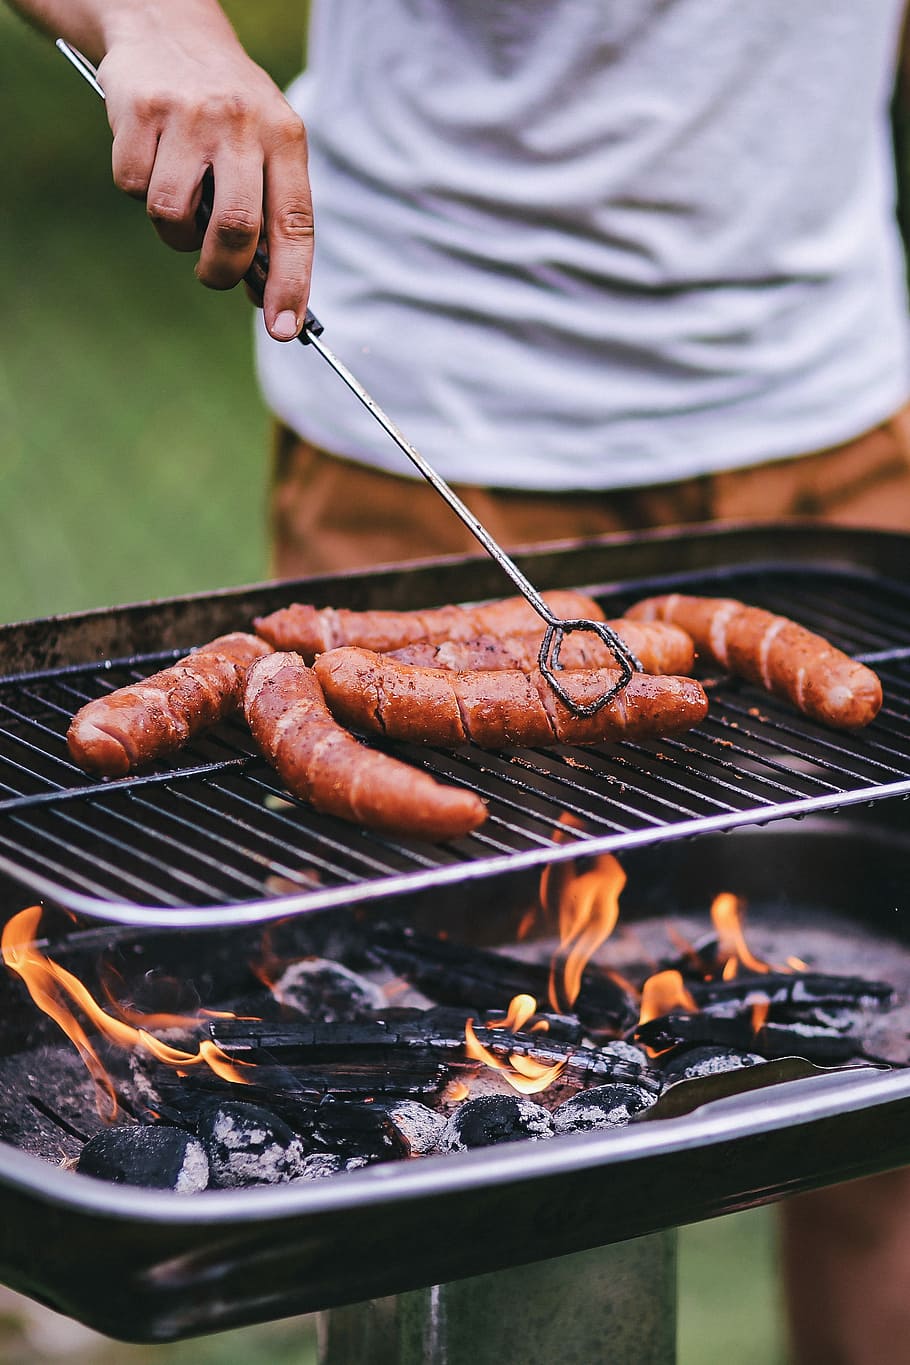 Pork and sausage on the grill, summer, outdoor, kielbasa, sausages, HD wallpaper